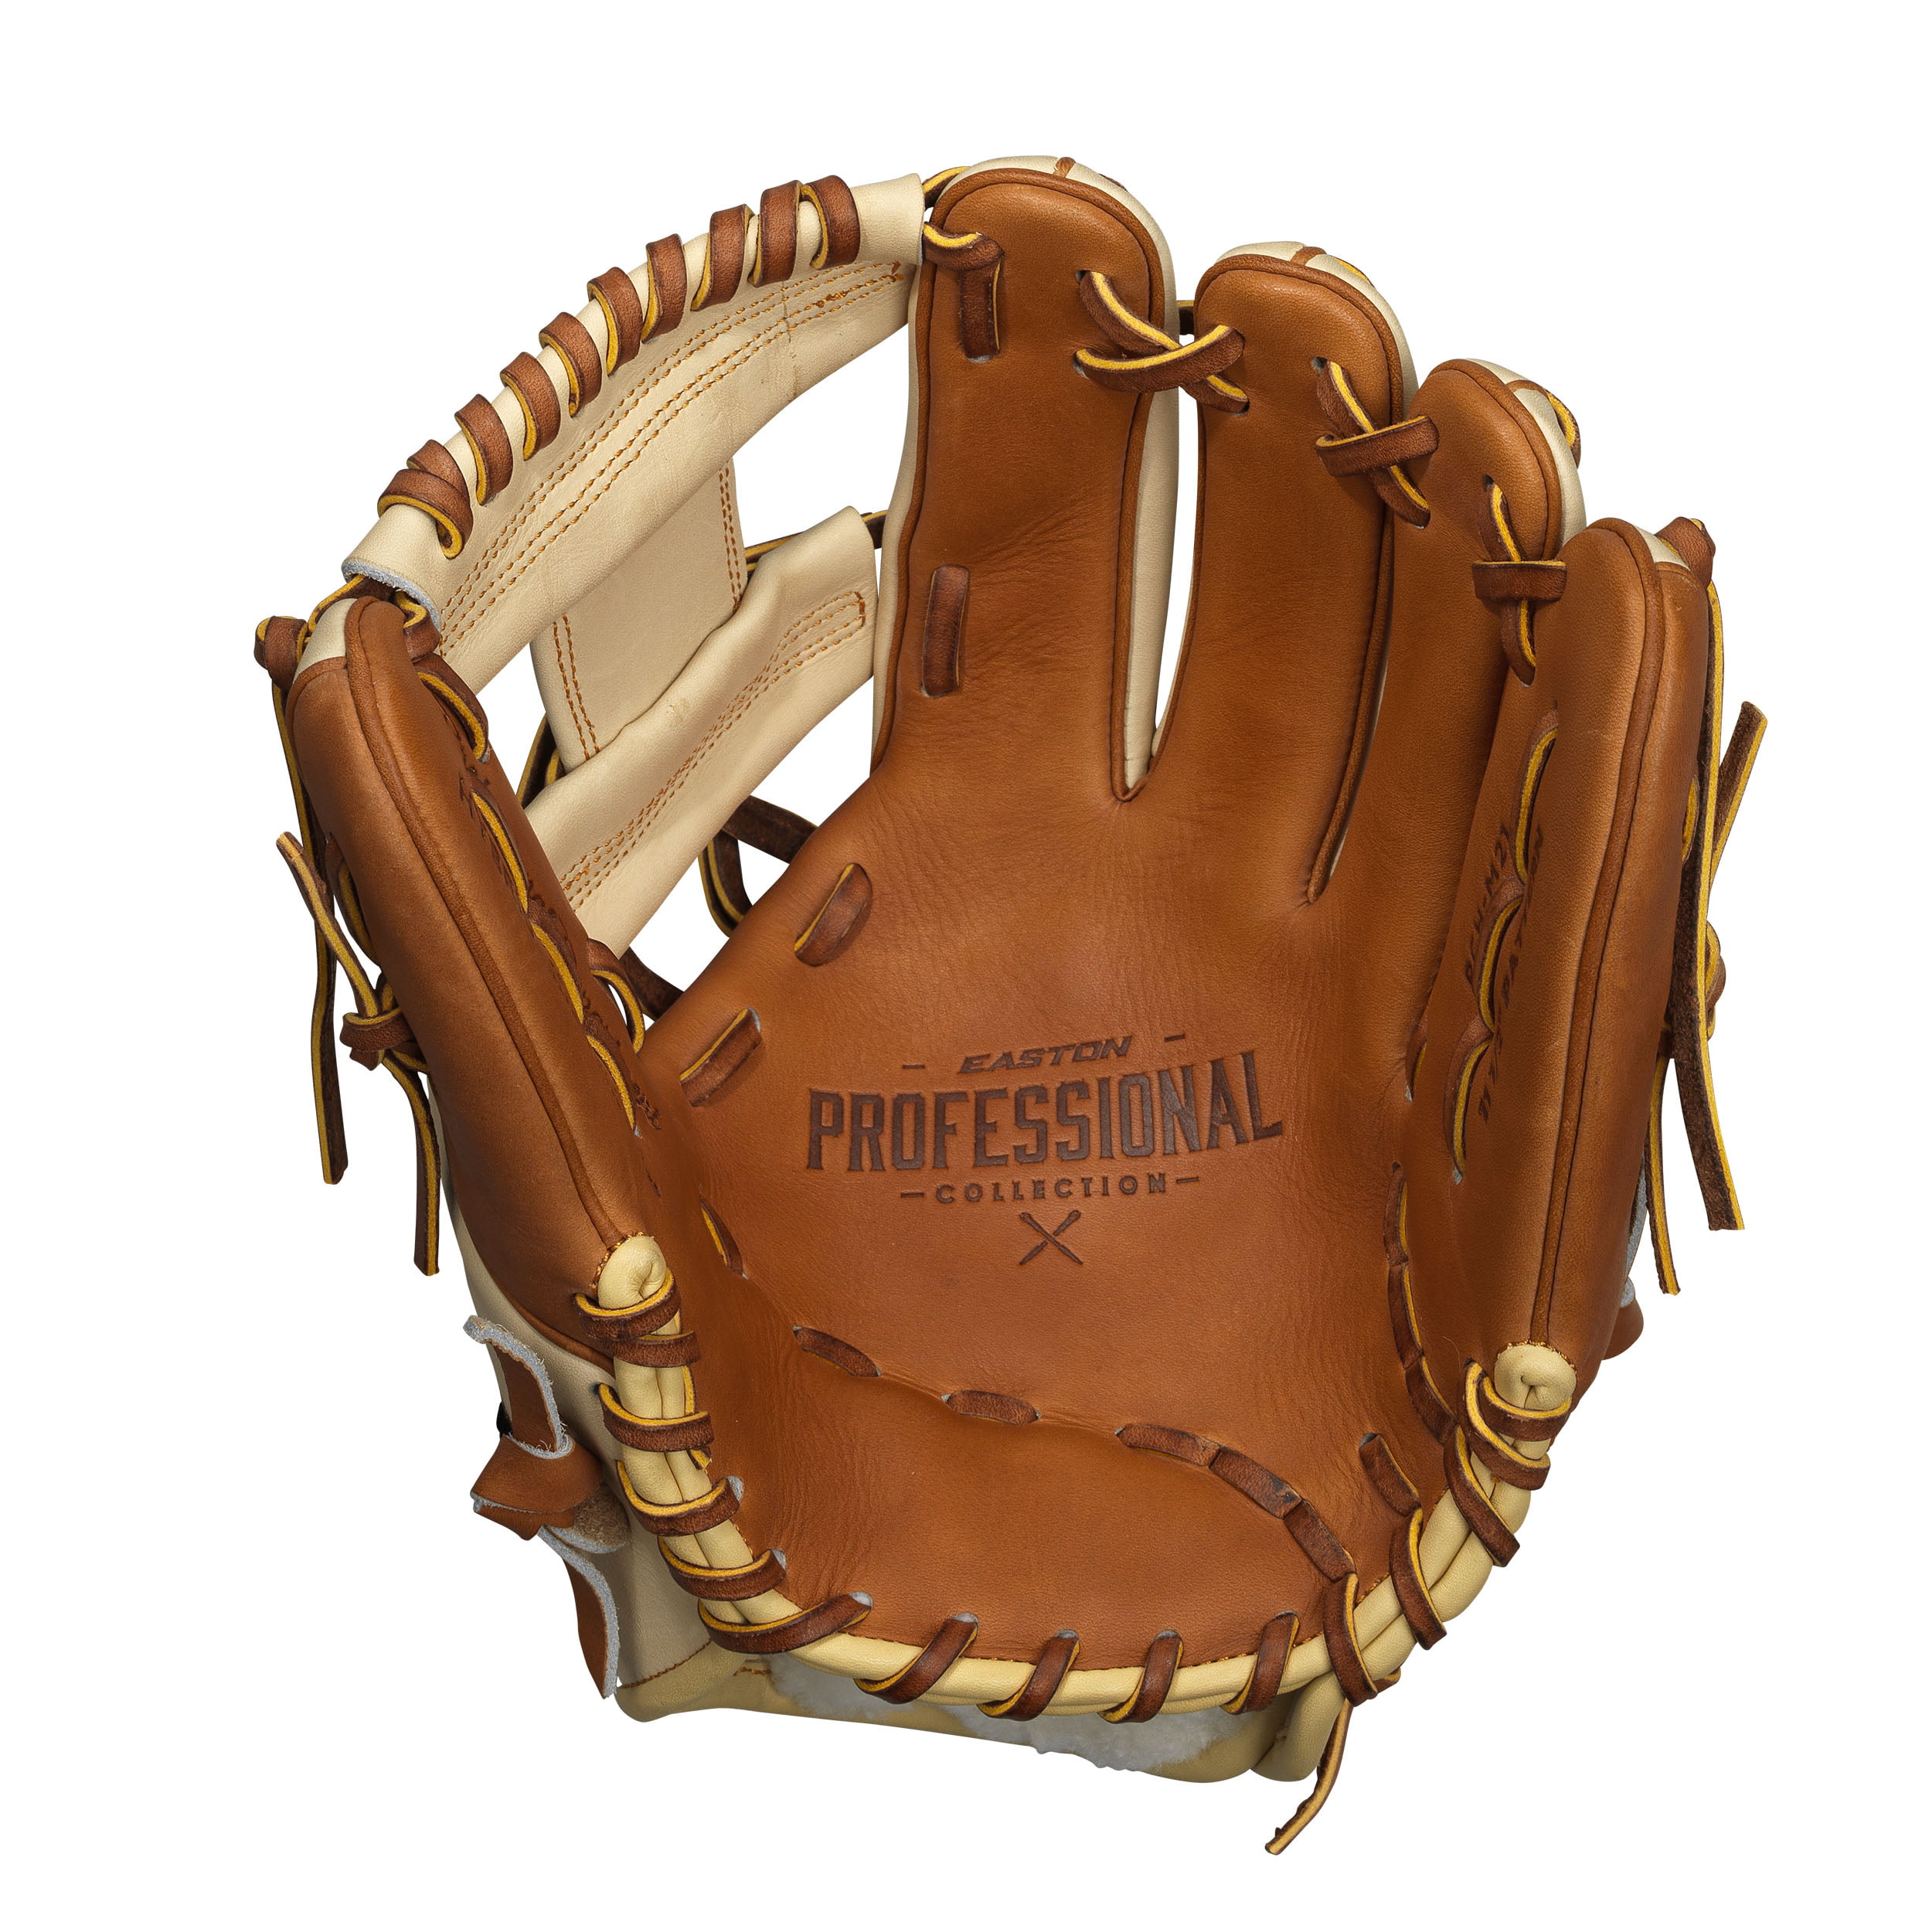 New Sports Soft Ball Leather Baseball Glove Thrower Training Professional Adult 